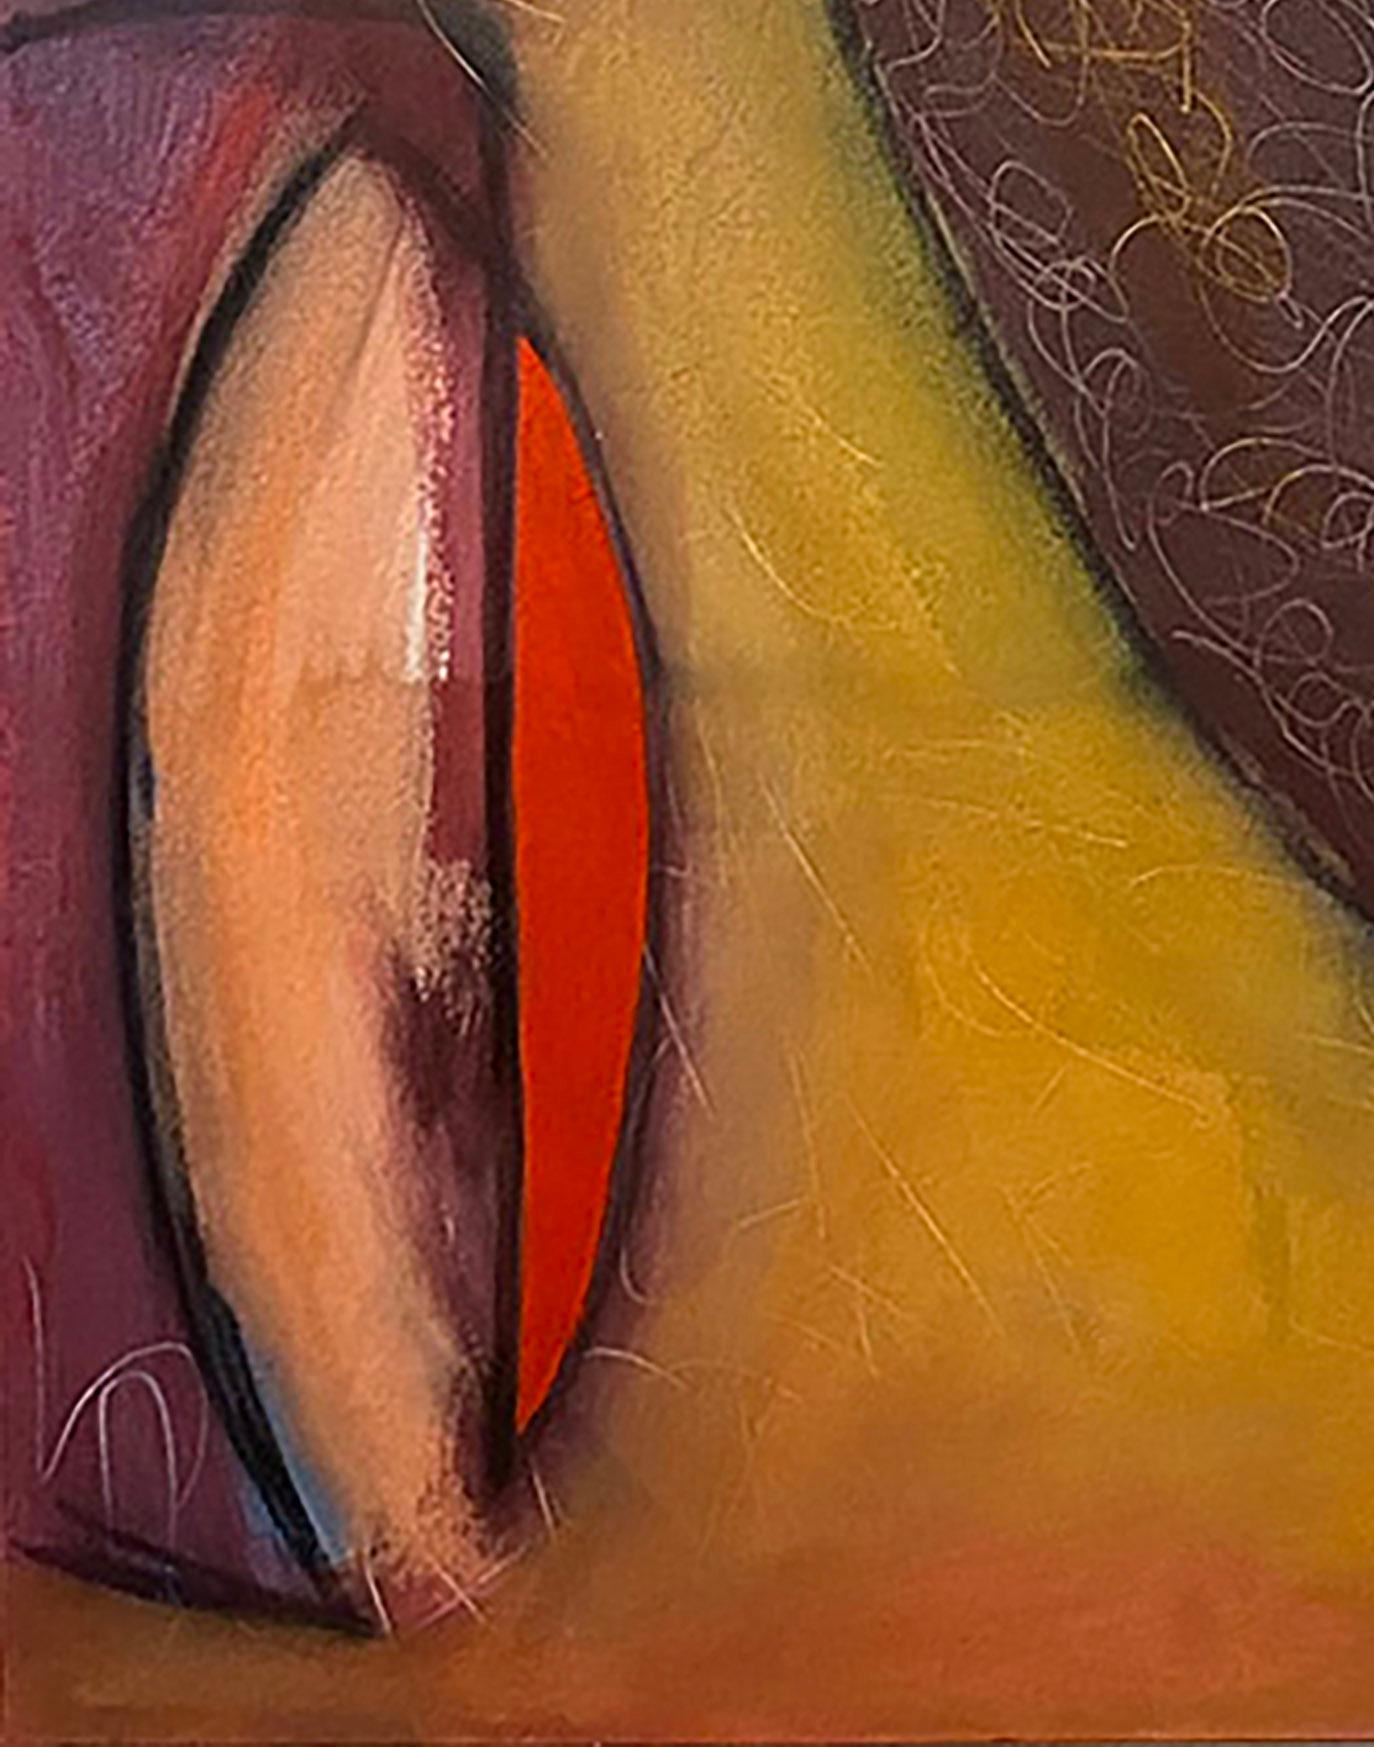 Good Morning #3, brown, red, green, abstract, vessel, muted - Painting by Ted Dixon